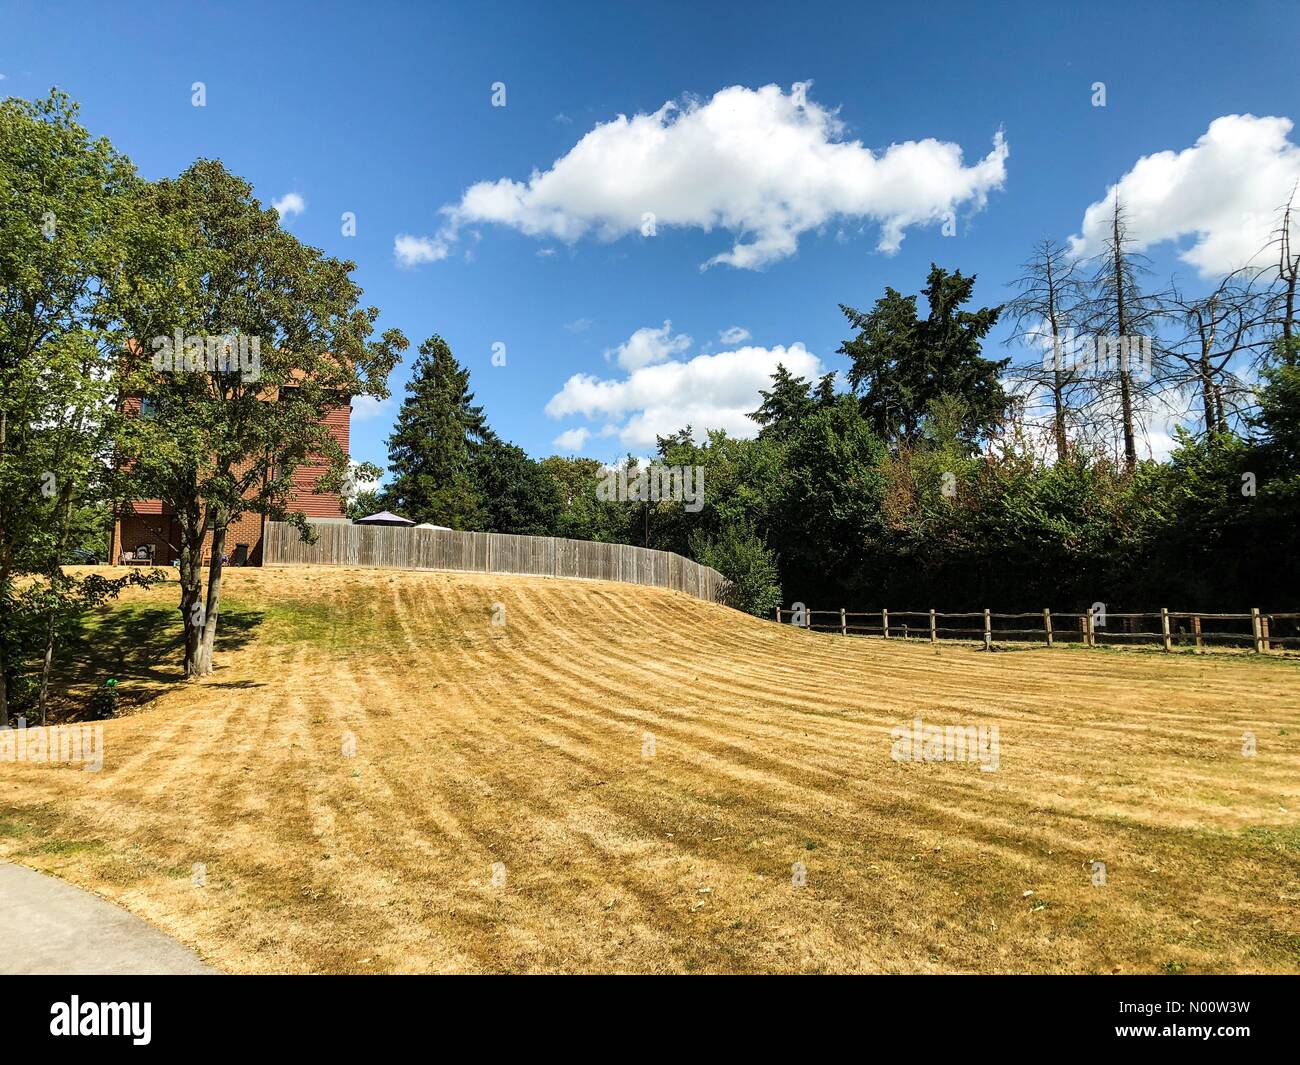 Godalming, UK. 28th July, 2018. UK Weather: Water shortages in Godalming. Sycamore Avenue, Godalming. 28th July 2018. Despite heavy rainfall overnight, water supplies remain critical. Parched lawns in Godalming, Surrey. Credit: jamesjagger/StockimoNews/Alamy Live News Stock Photo